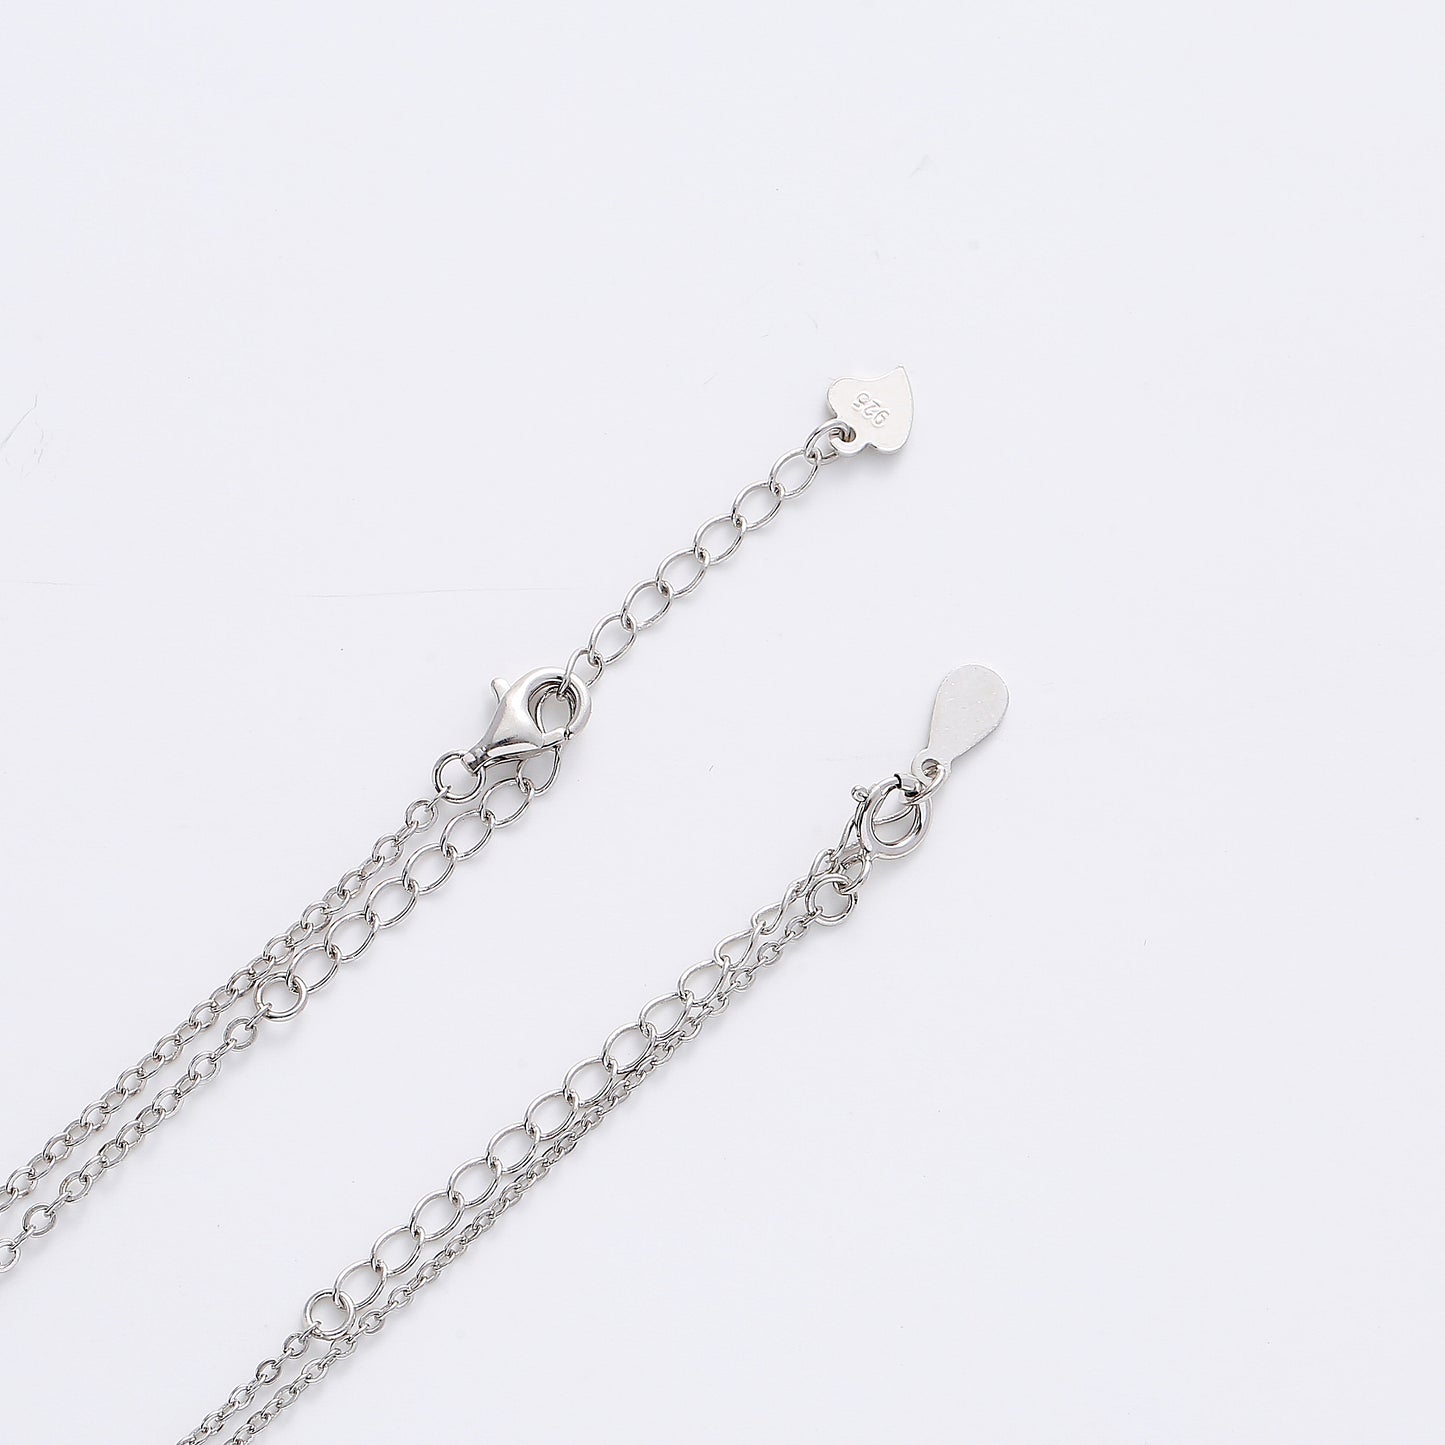 Sky Waves 925 Silver Couple Necklace